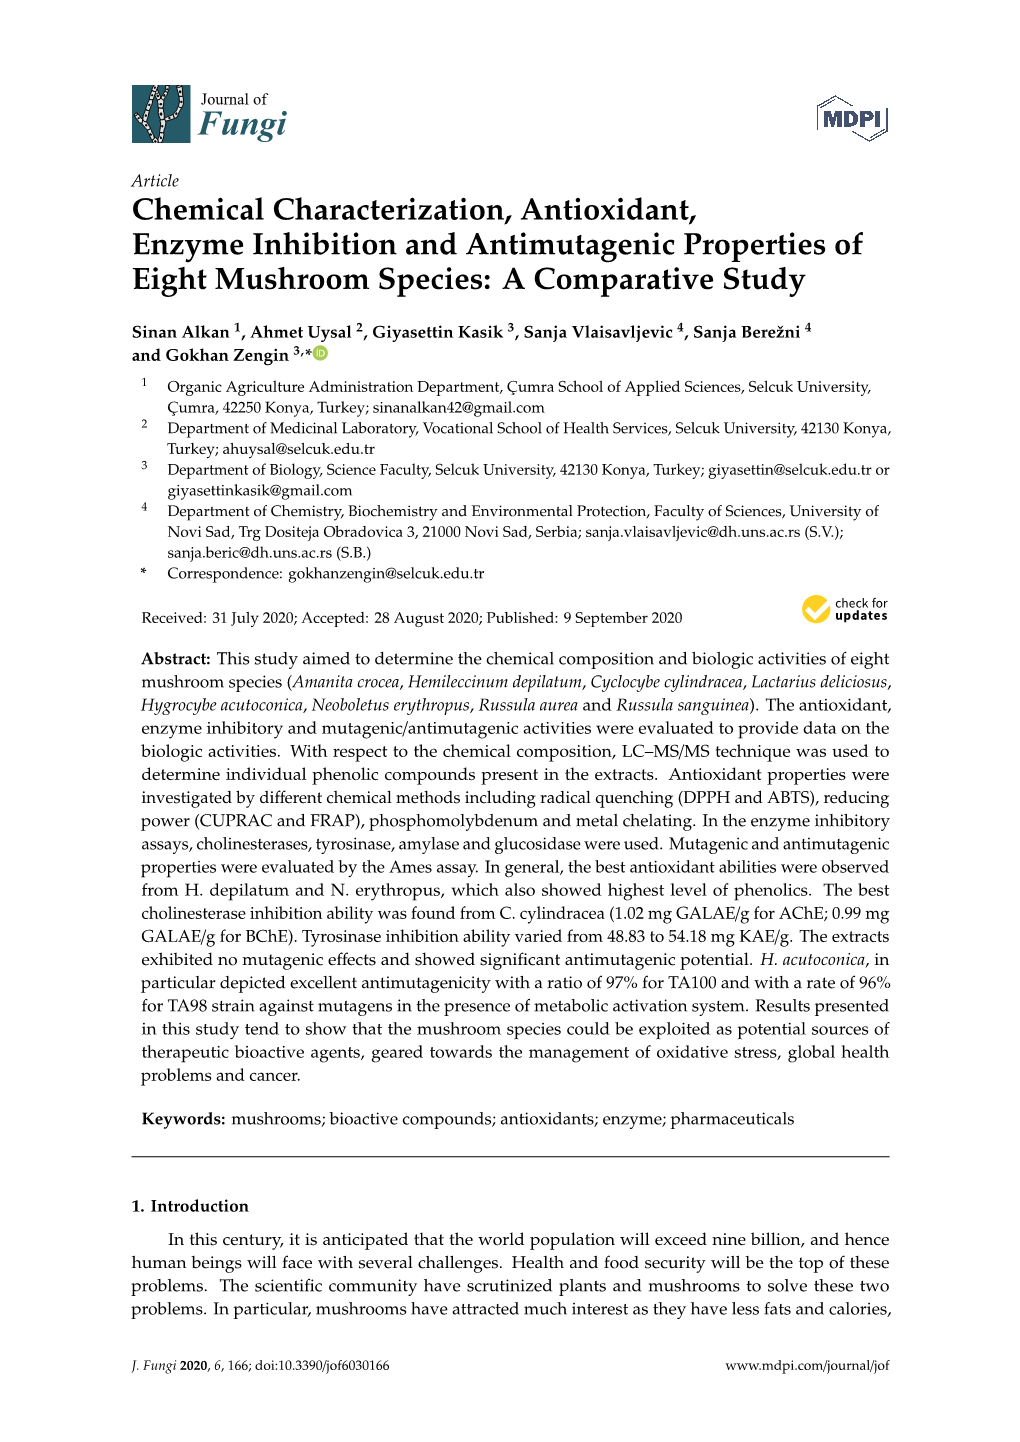 Chemical Characterization, Antioxidant, Enzyme Inhibition and Antimutagenic Properties of Eight Mushroom Species: a Comparative Study